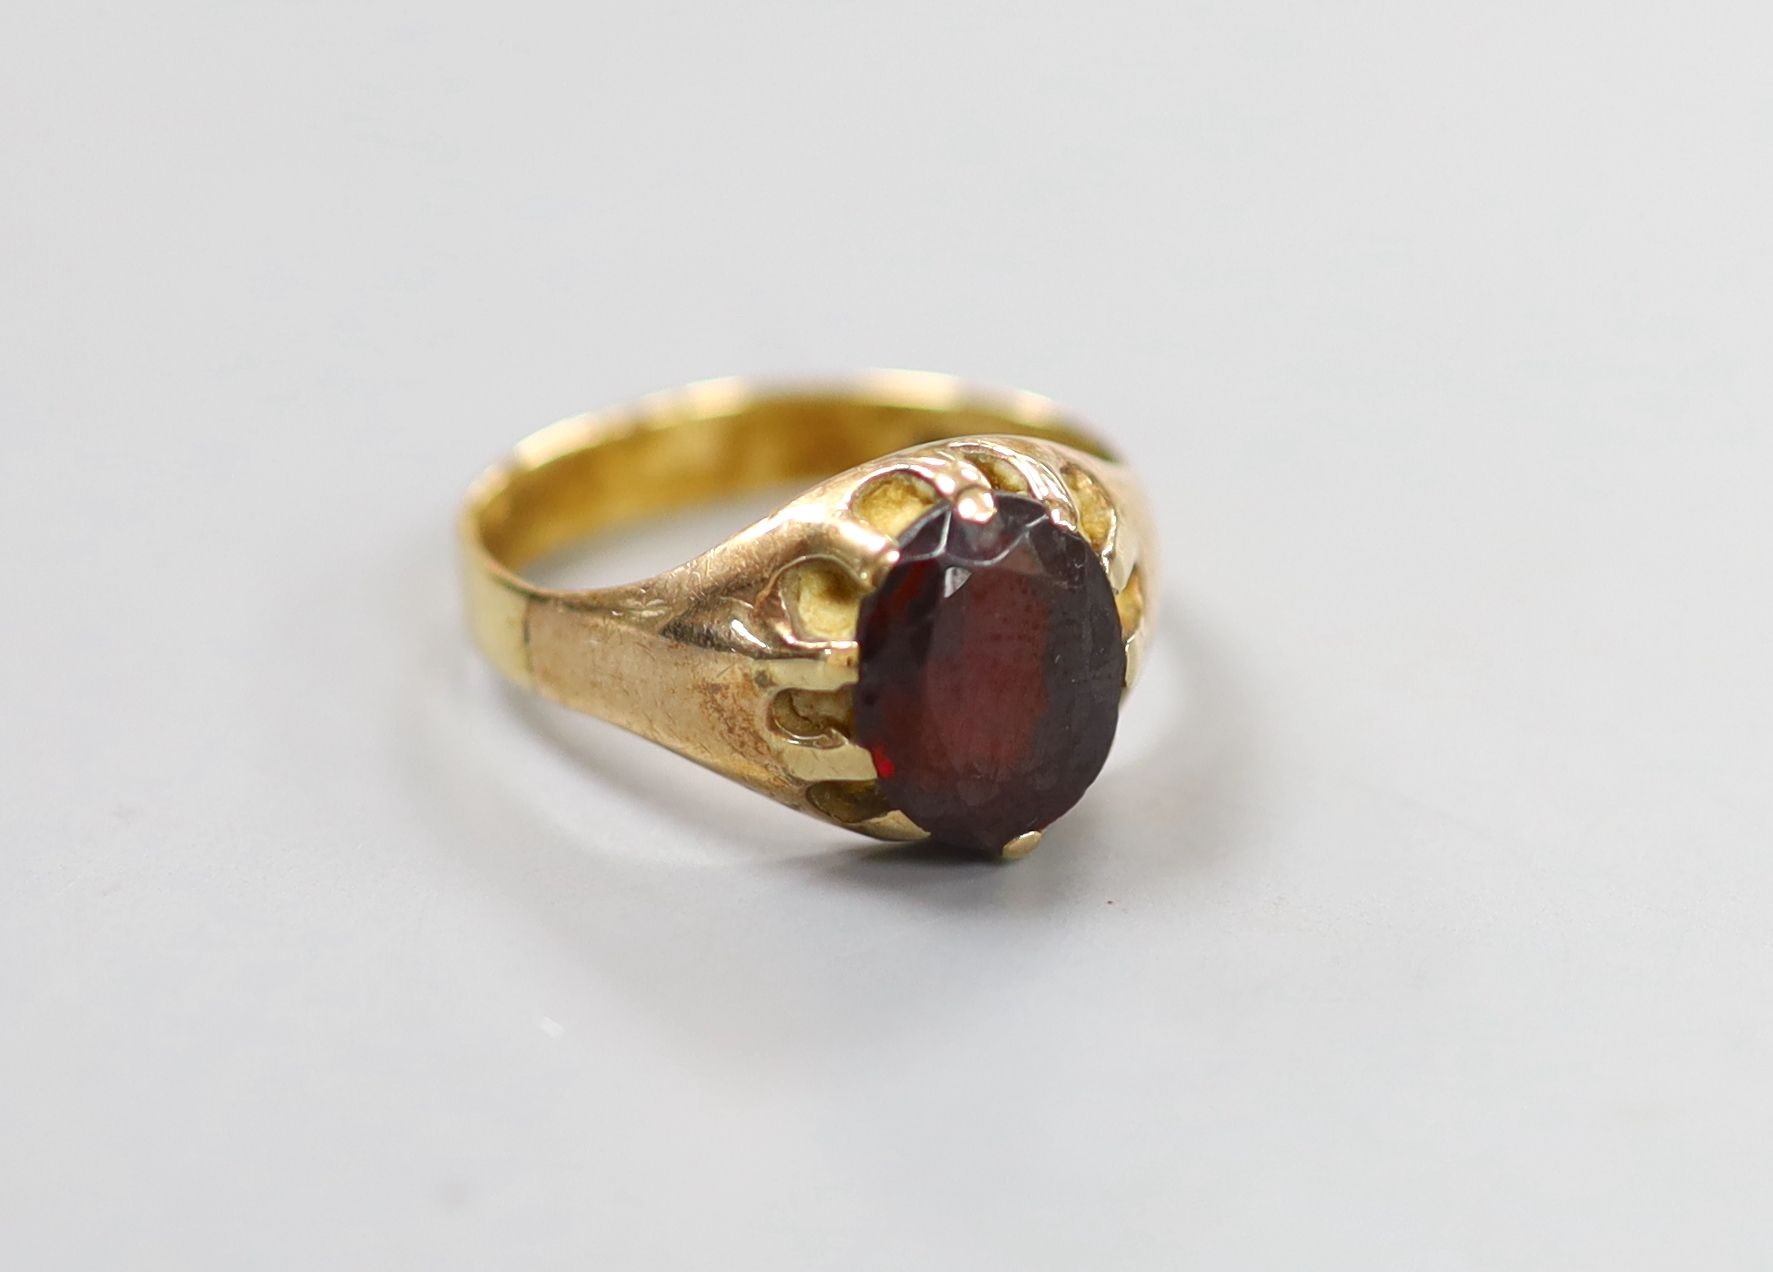 A 9ct gold and claw set oval cut garnet ring, size Q, gross 3.6 grams (stone worn).